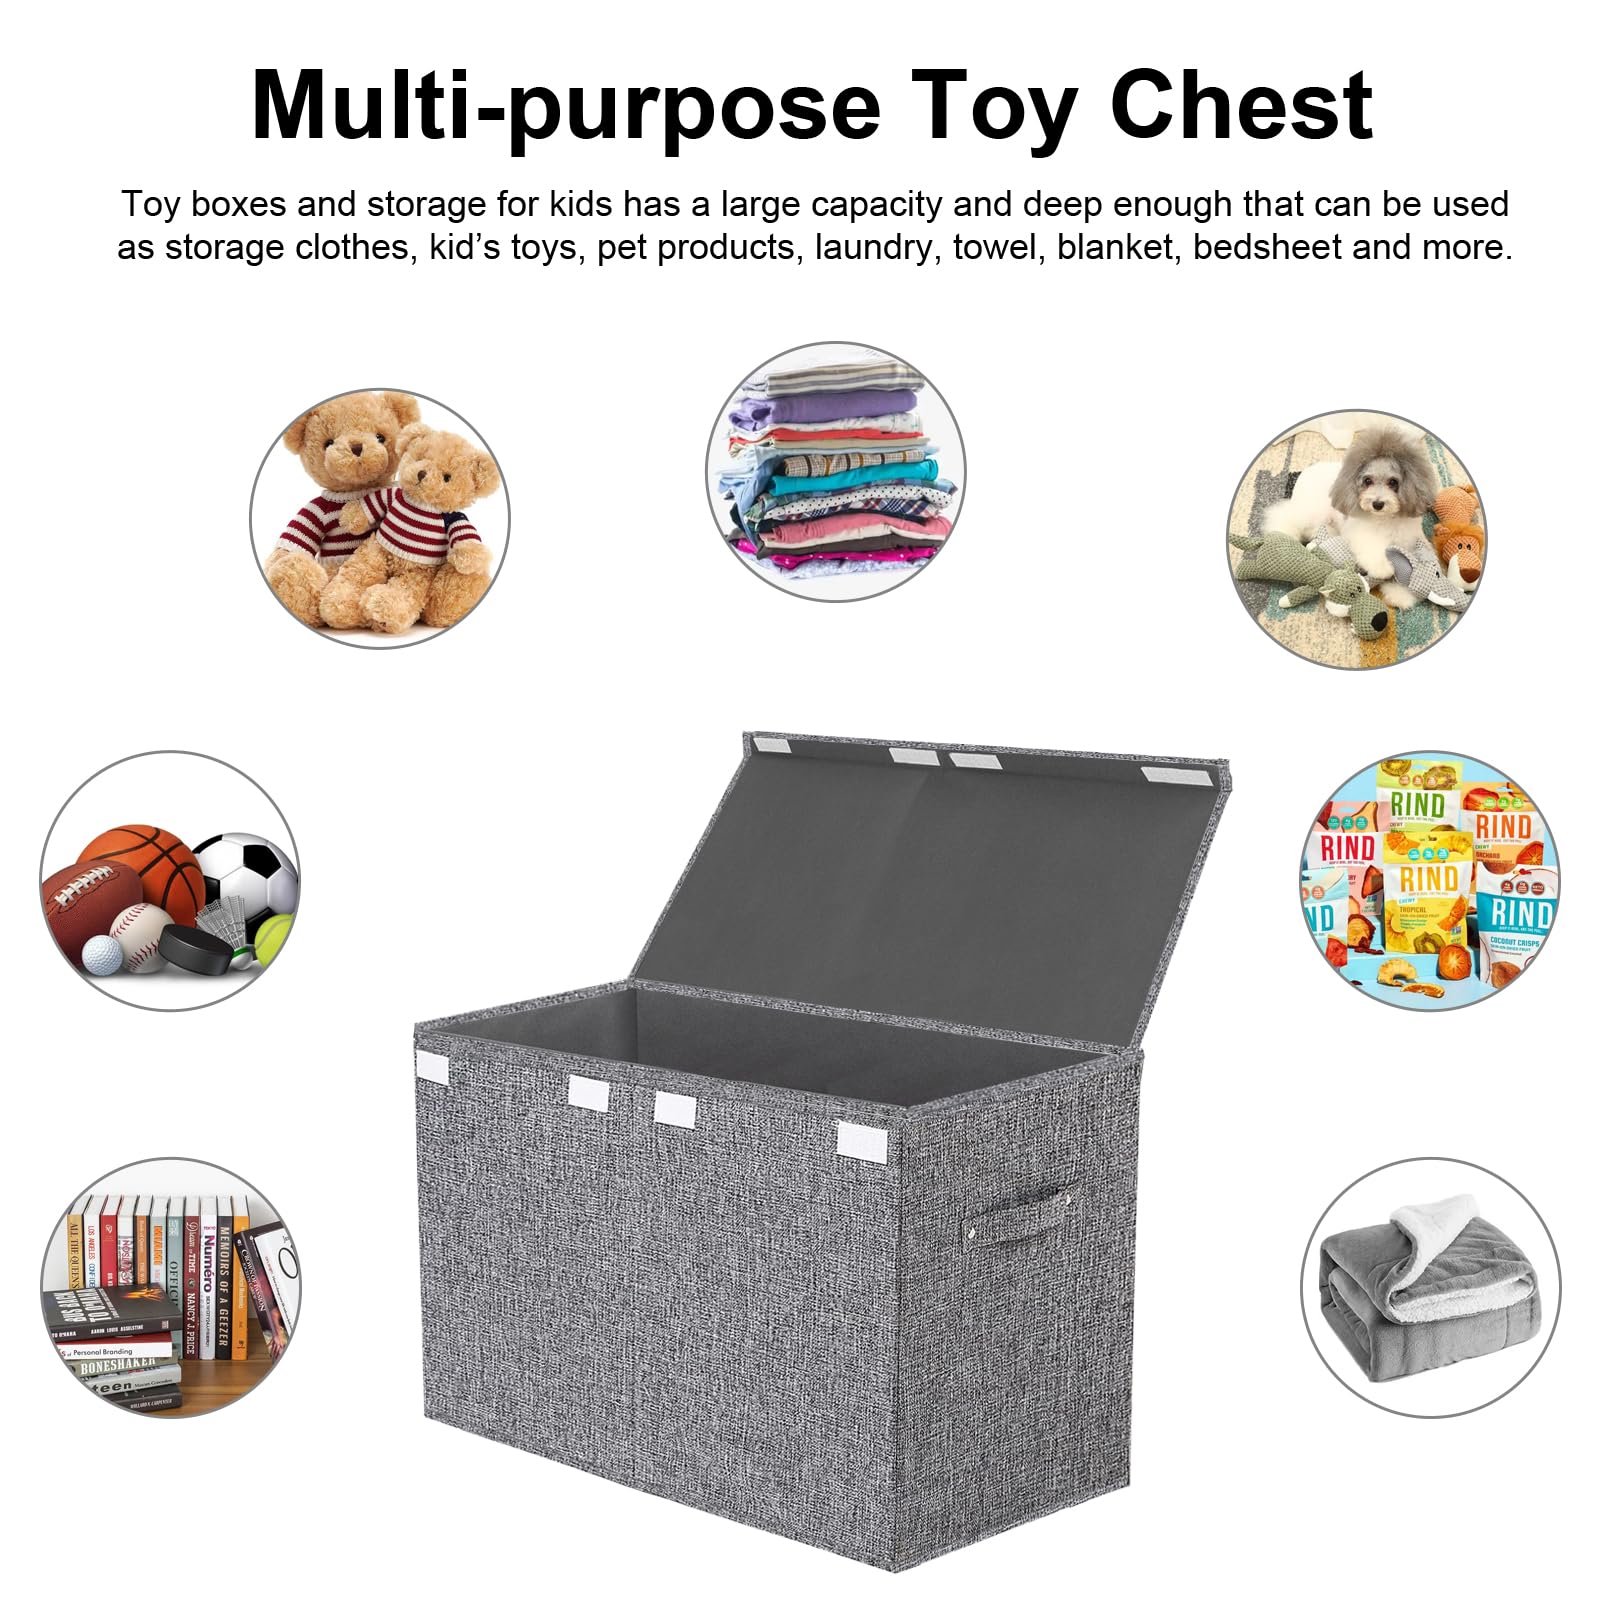 VERONLY Large Toy Box Chest Storage with Lid - Collapsible Kids Toys Boxes Organizer Bins Baskets with Handles for Boys, Girls,Nursery,Playroom,Clothes,Blanket,Bedroom( Gray)